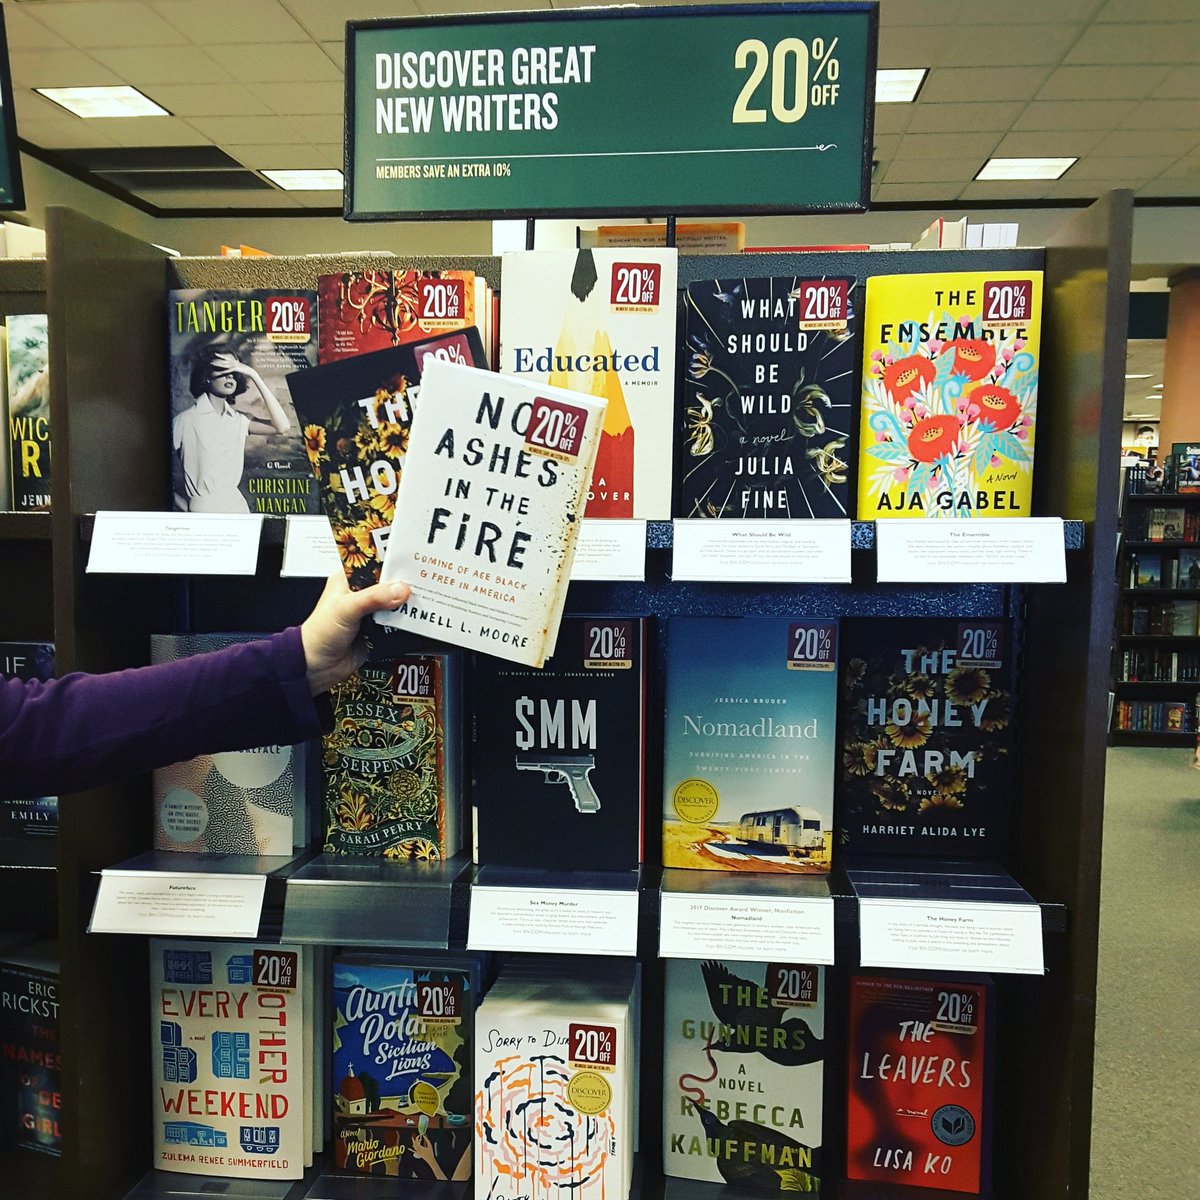 Did you know?
The Discover Great New Writers bay has been refreshed
#barnesandnoble #barnesandnobleaugusta #discoverbay #discovergreatnewwriters #thehoneyfarm #harrietalidalye #noashesinthefire #darnelllmoore #thejoyofreading #summerreading #addtothelist #greatsuggestions